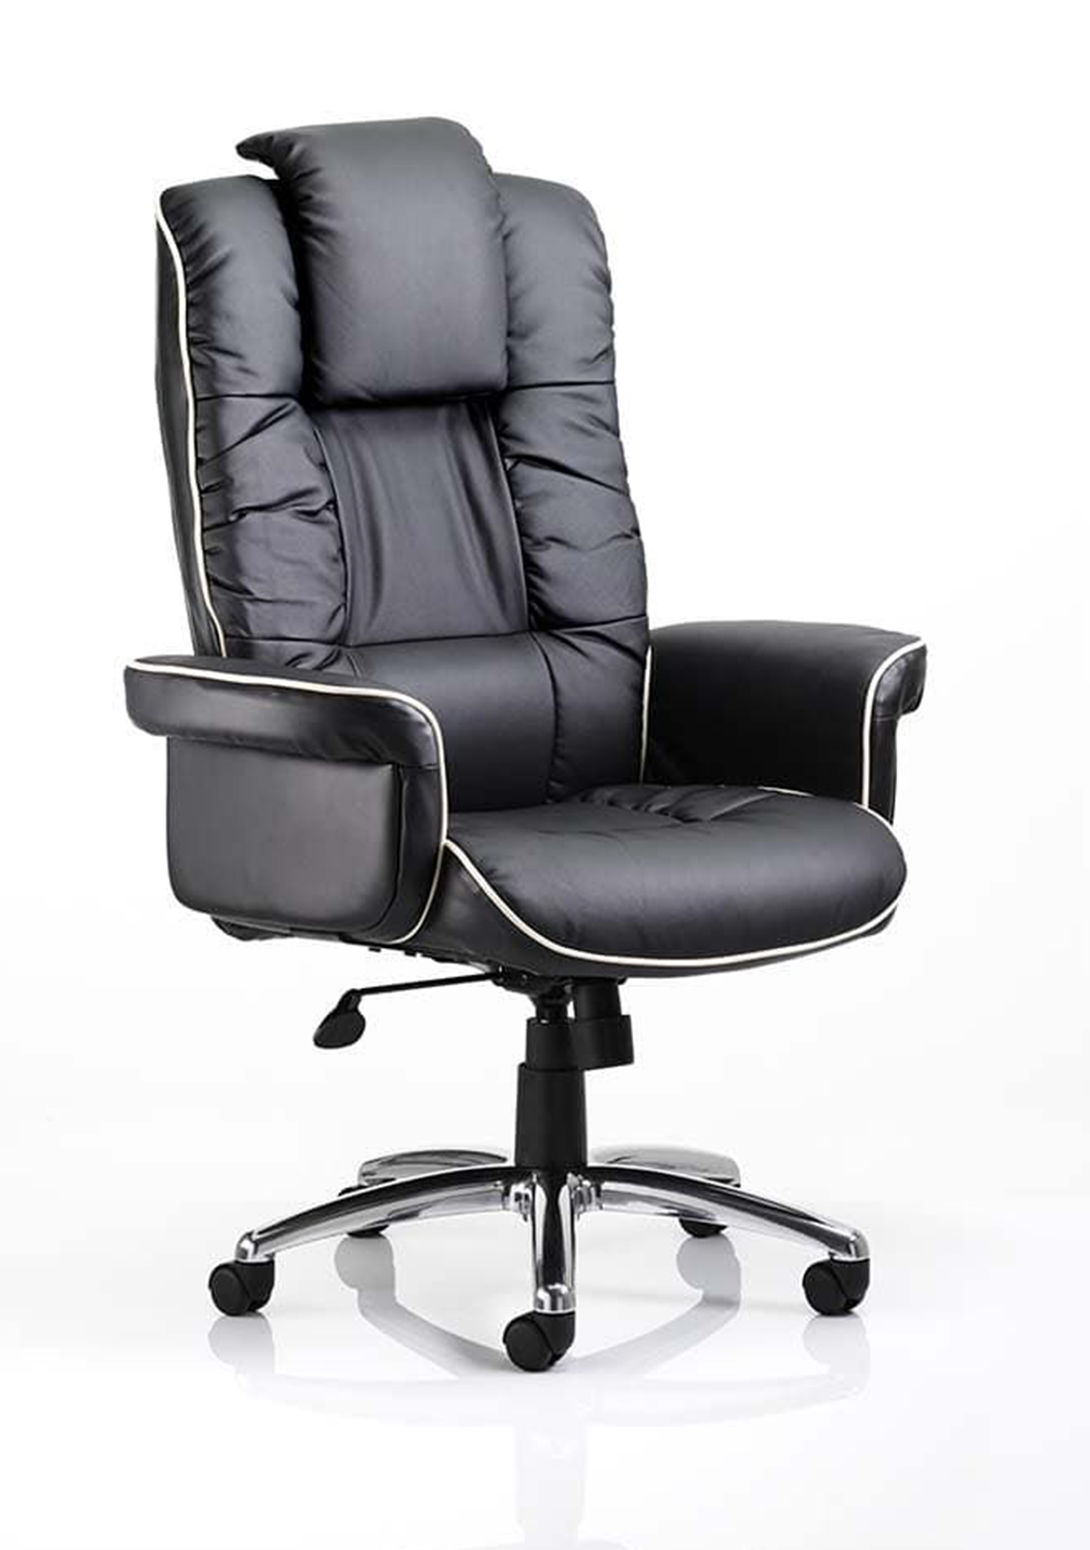 Chelsea Leather Executive Chair